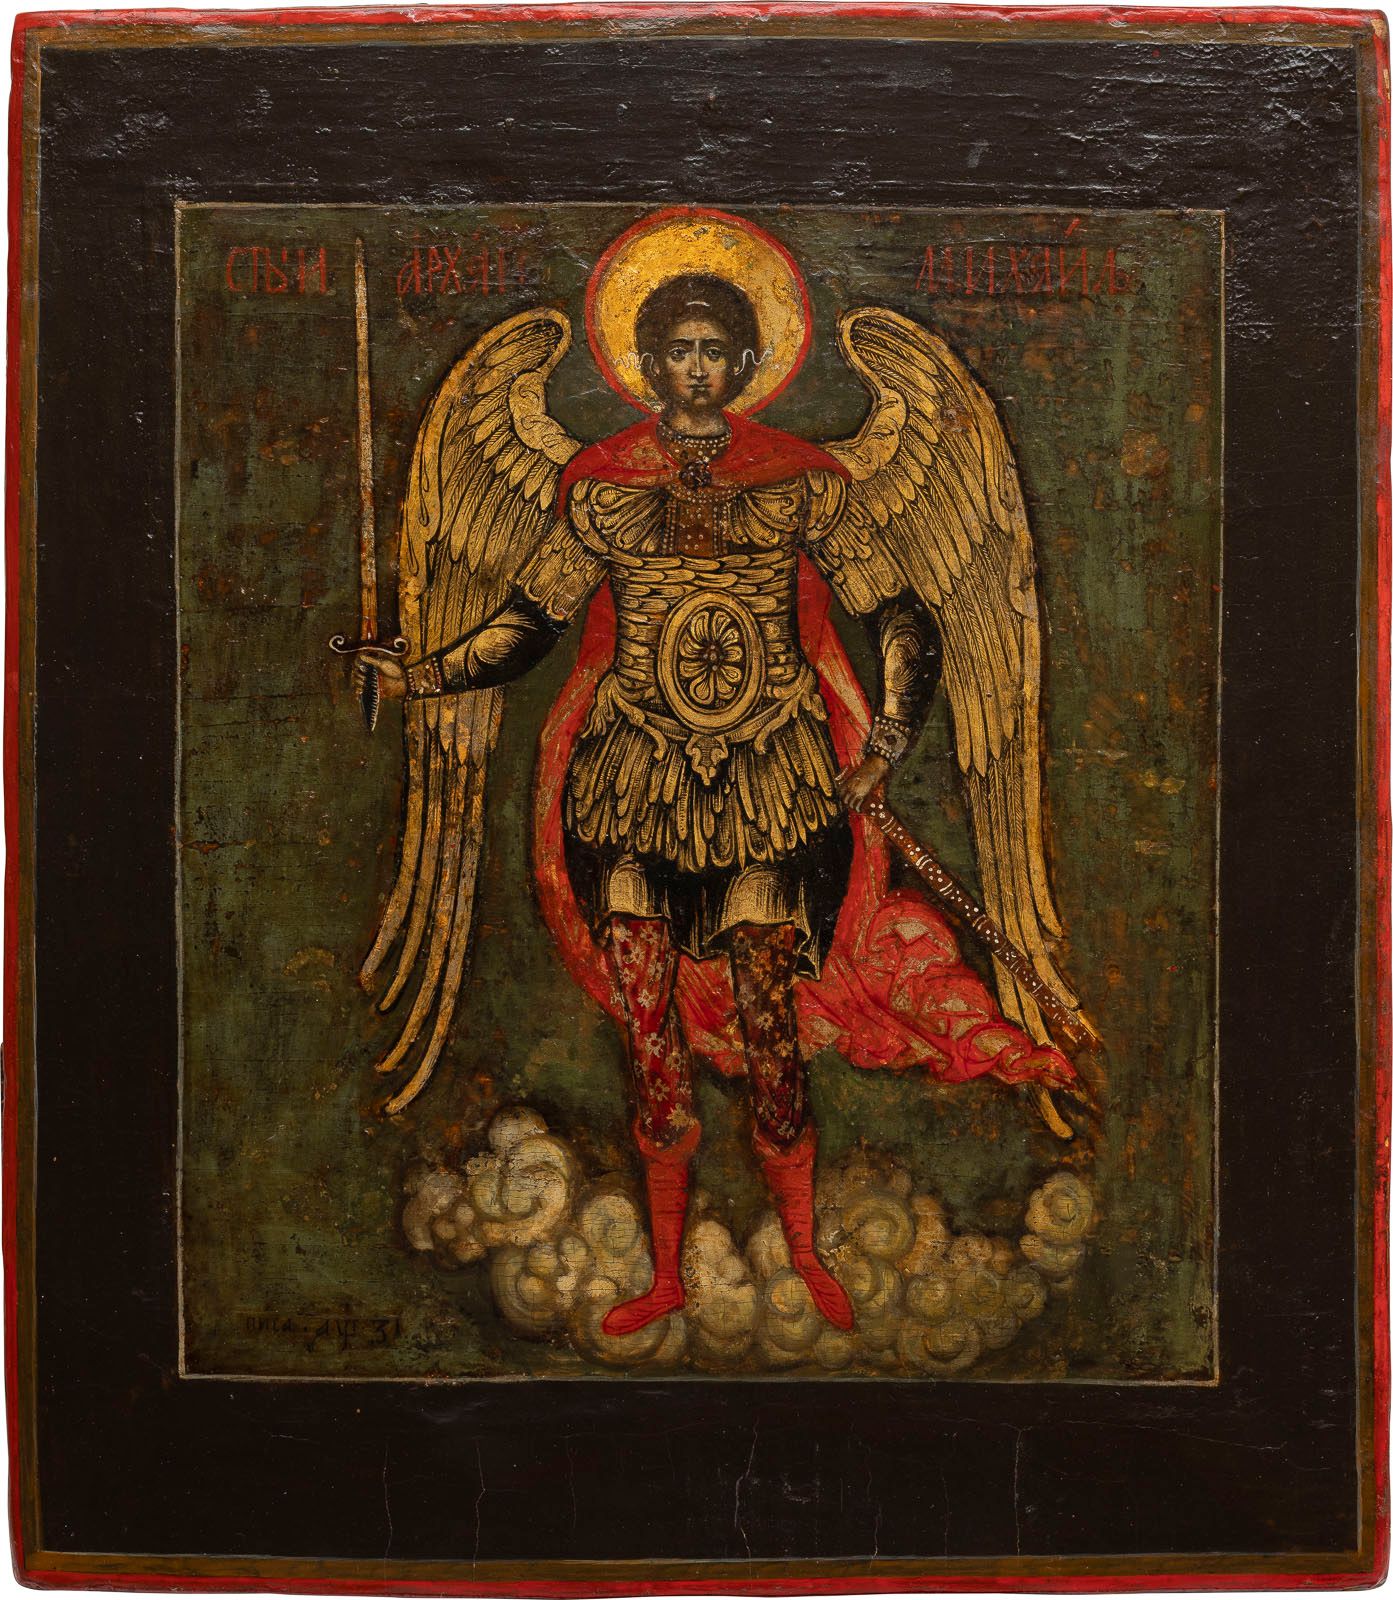 A DATED ICON SHOWING THE ARCHANGEL MICHAEL A DATED ICON SHOWING THE ARCHANGEL MI&hellip;